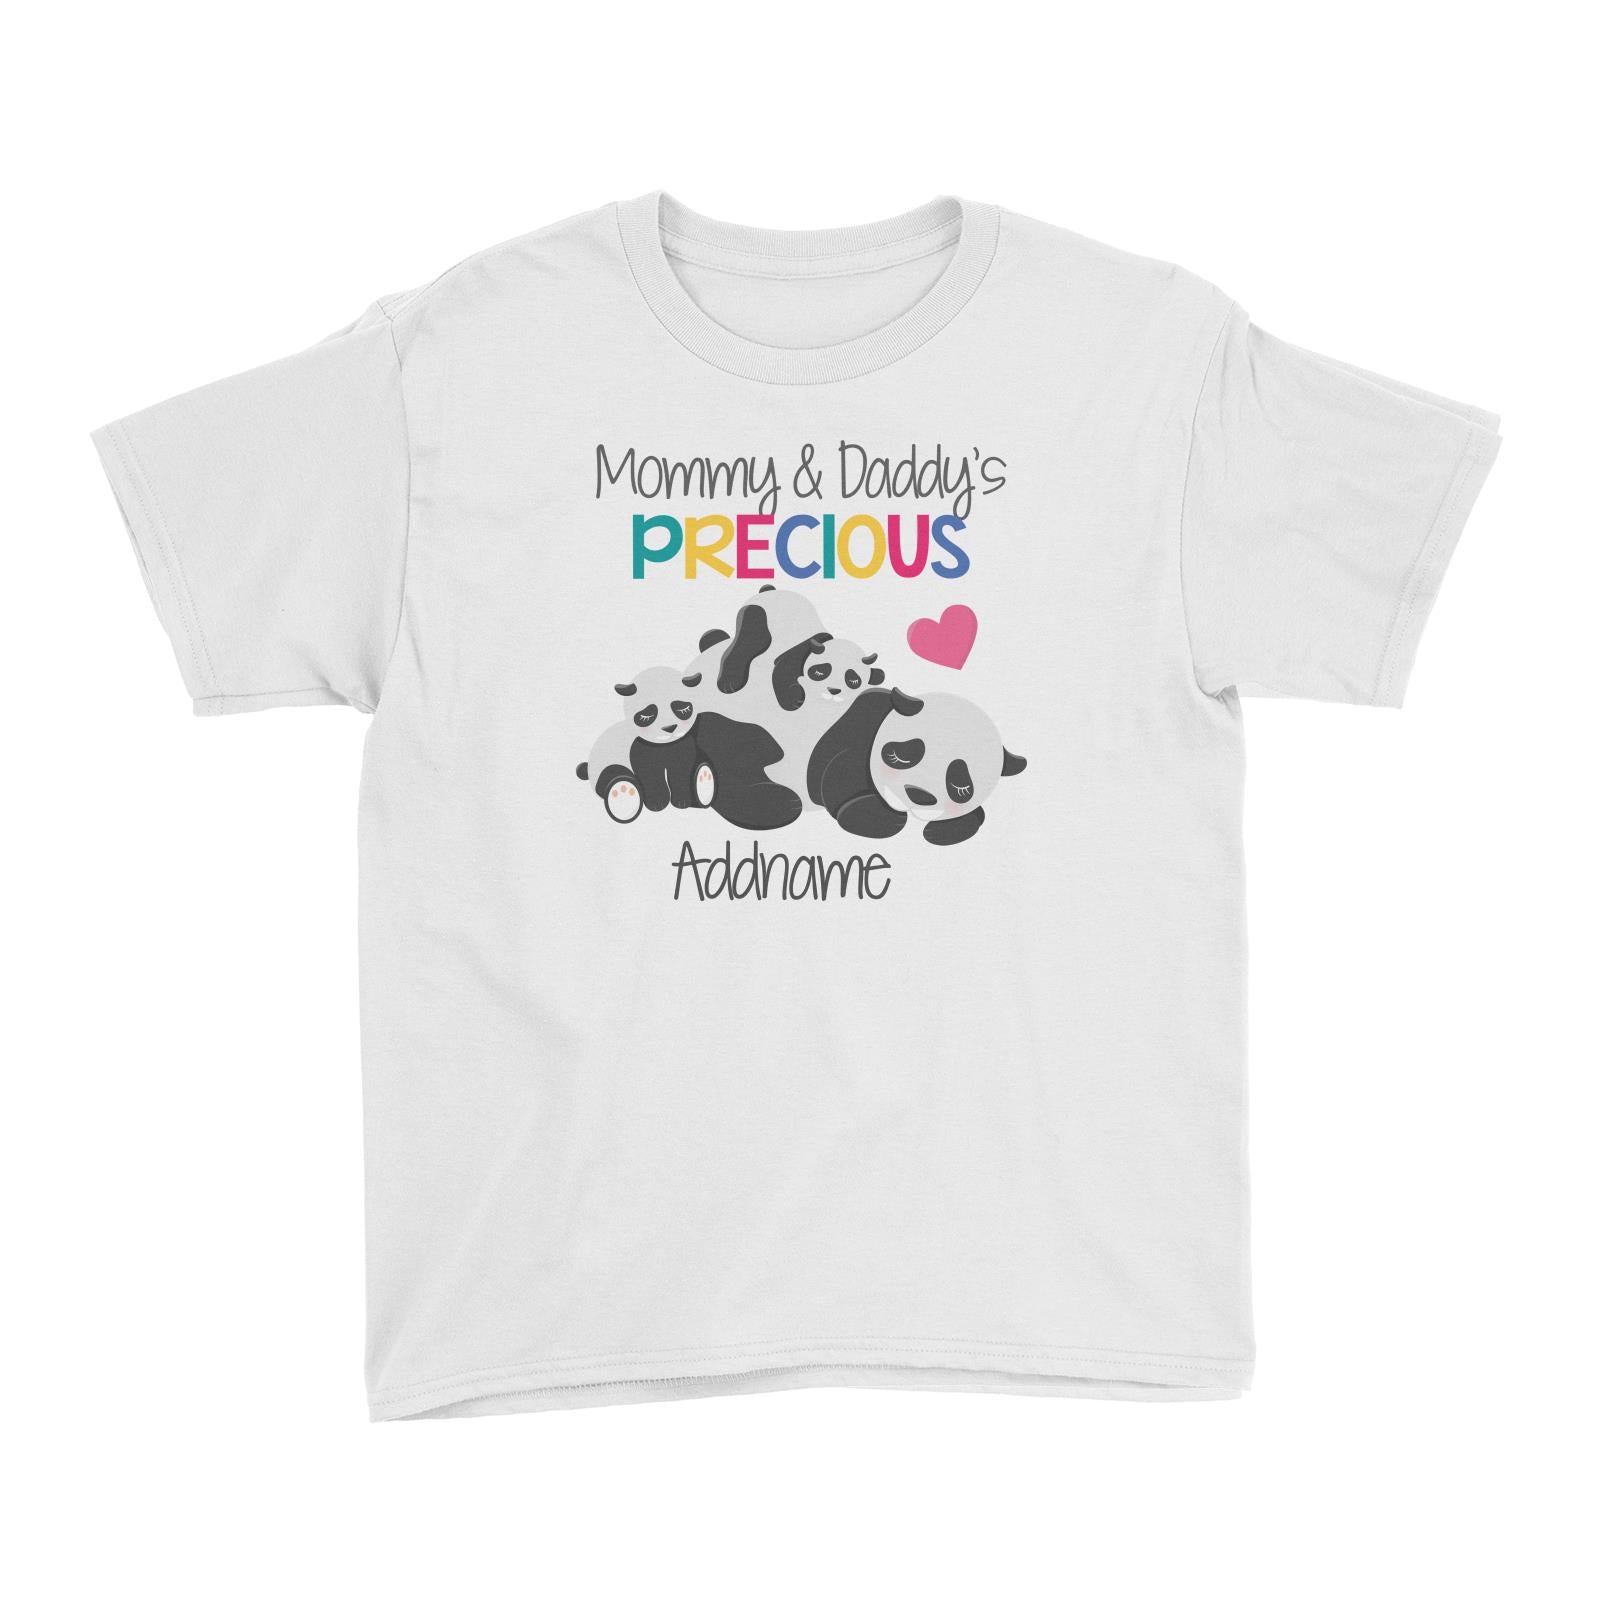 Animal & Loved Ones Mommy & Daddy's Precious Panda Family Addname Kid's T-Shirt